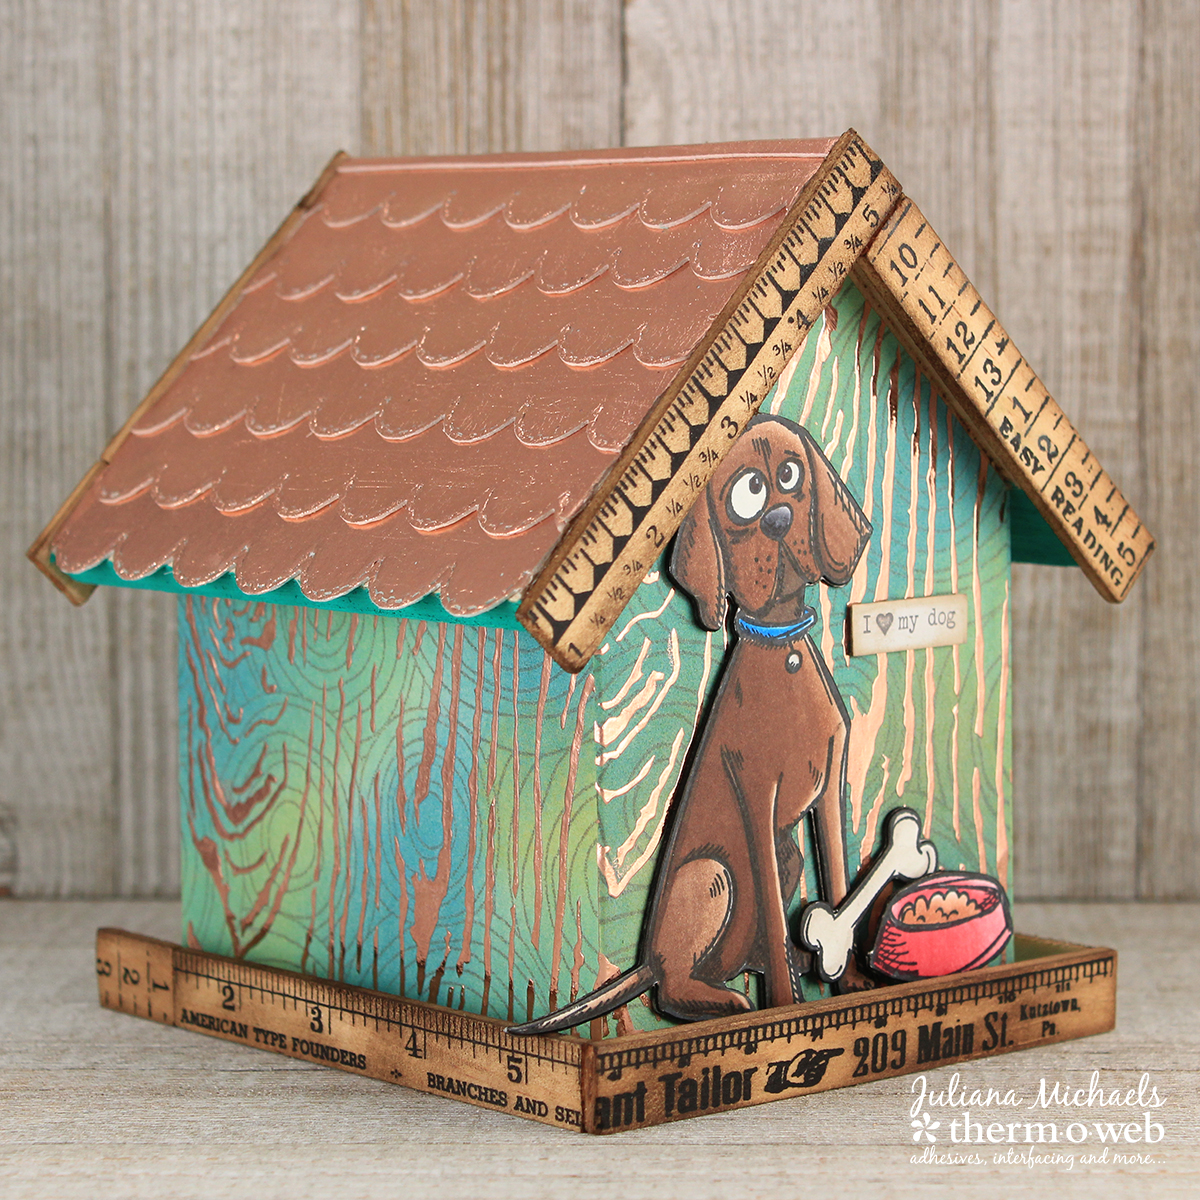 Mixed Media Dog House by Juliana Michaels featuring Therm O Web Deco Foil